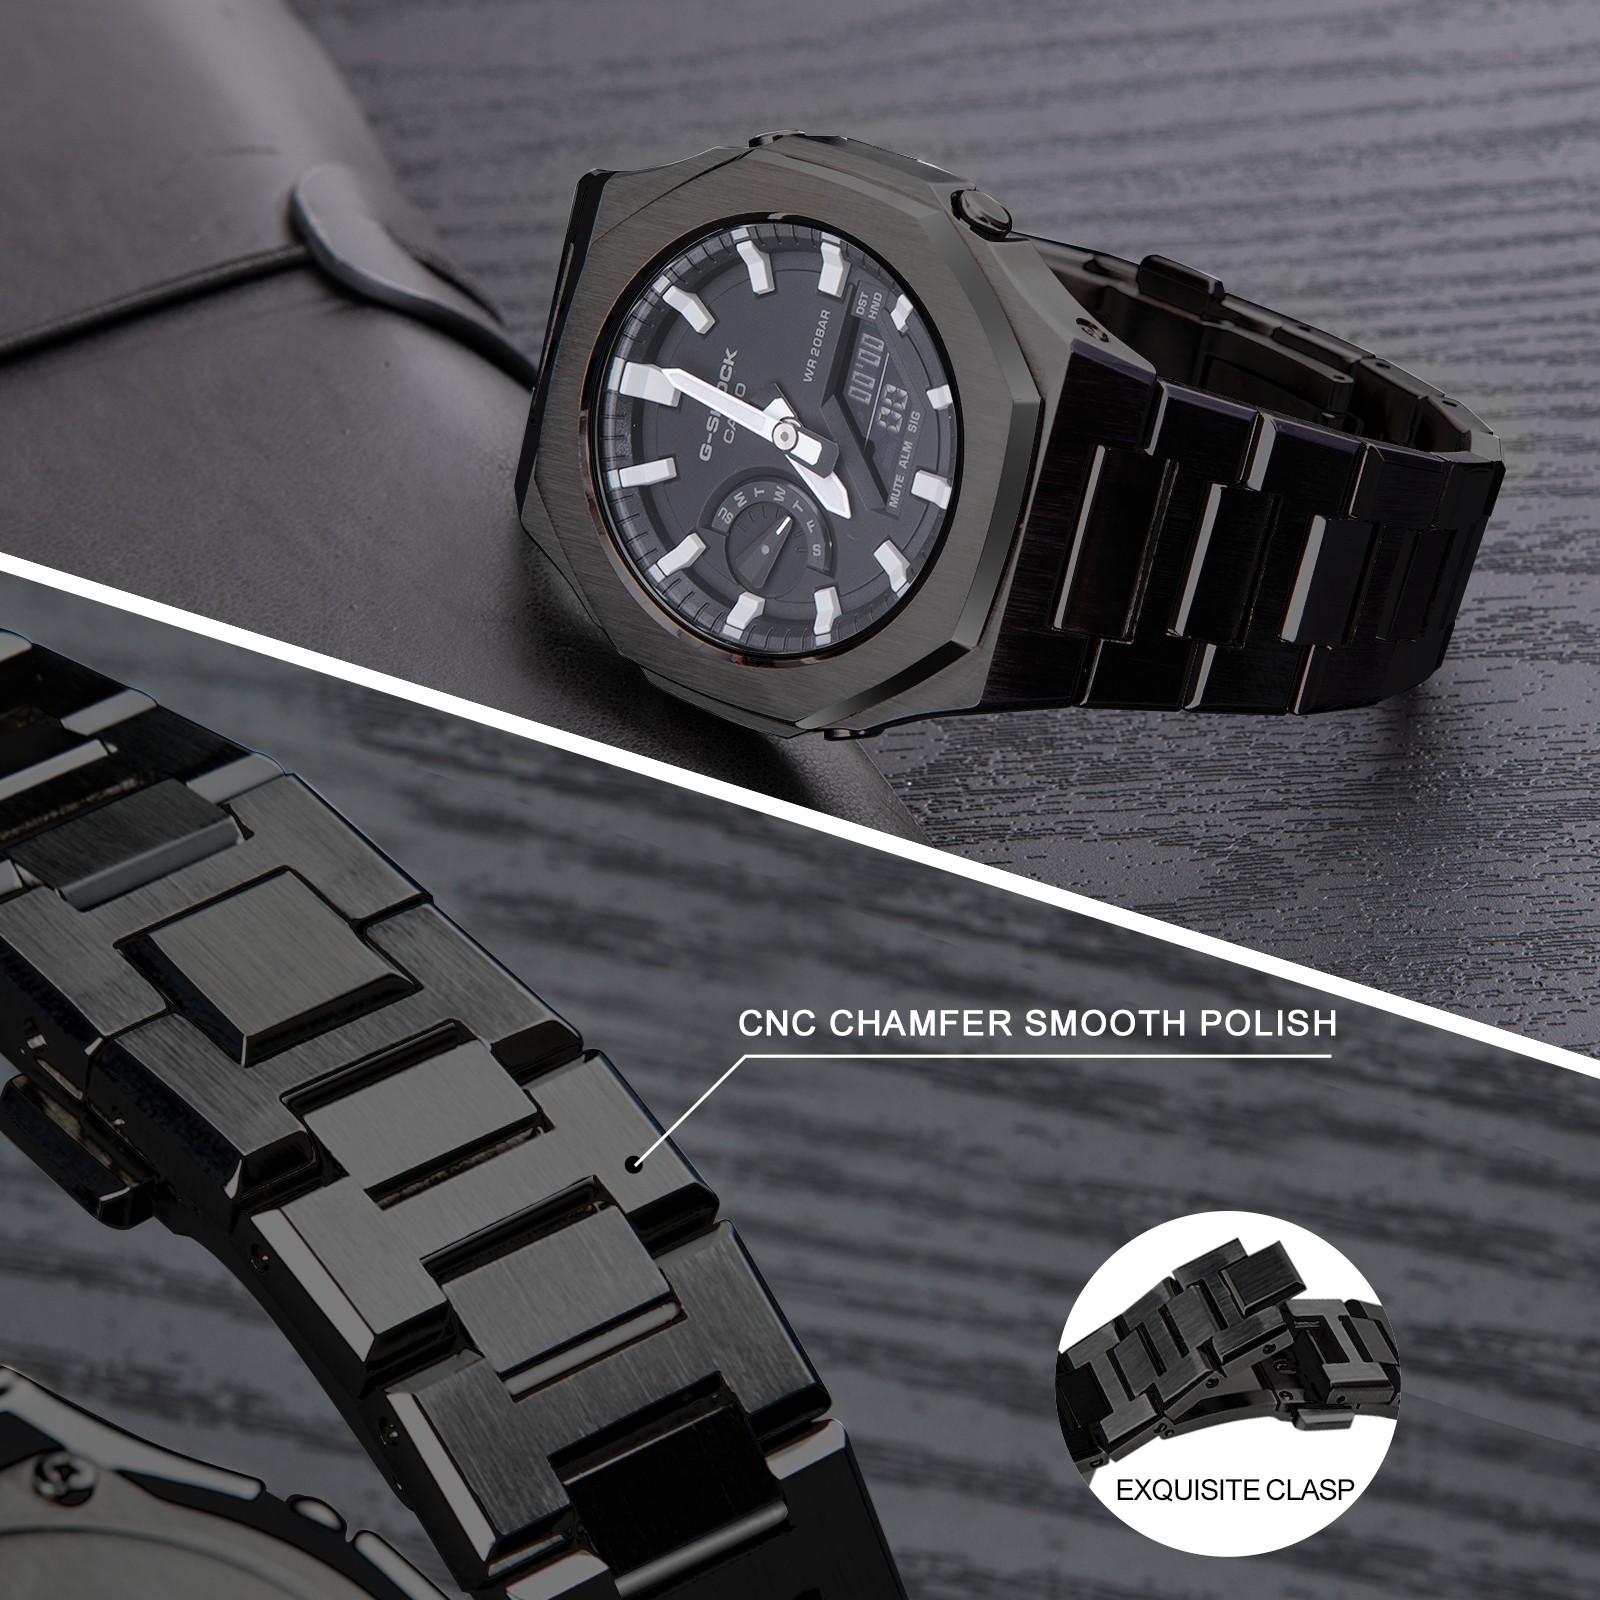 Hontao GA2100 New Model Home Oak All Metal Bezel Strap Simple Style In One Watch Bands For G-SHOCK GA2100/2110 Accessories